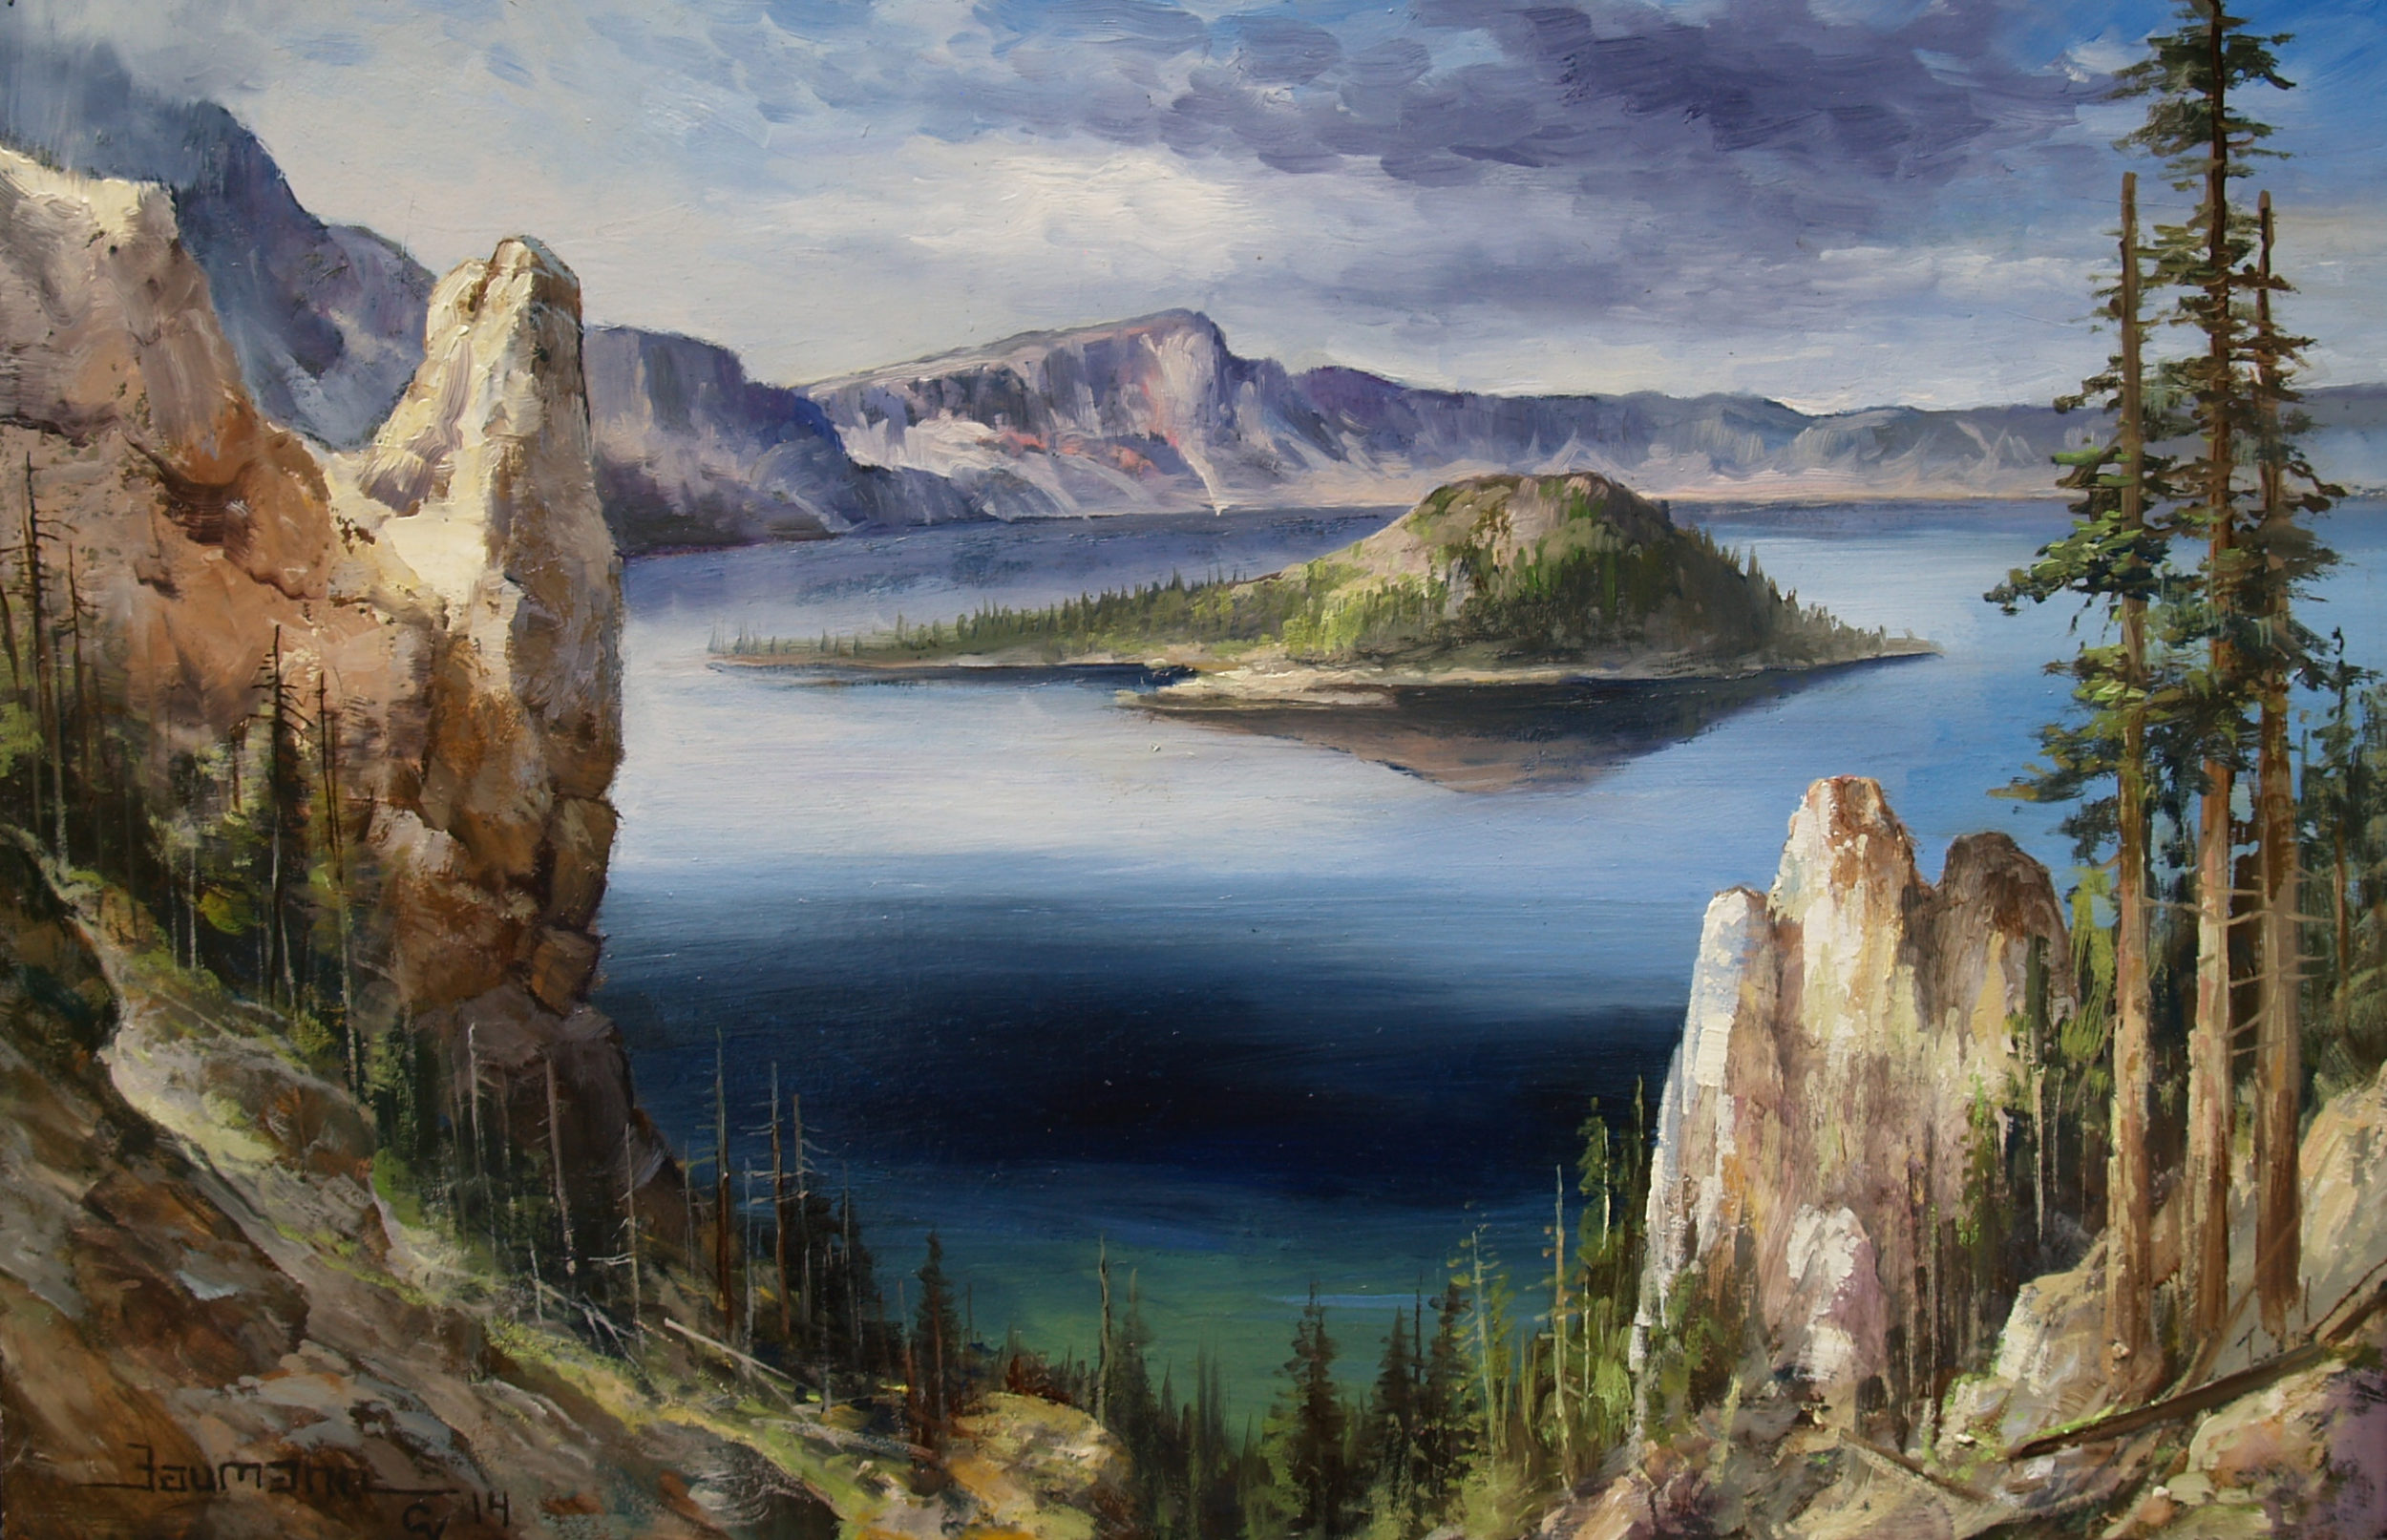 This is a painting called Still Waters Run Deep of Crater Lake by Stefan Baumann shows a view of the island in the surrounded by the deep blue water of the lake.